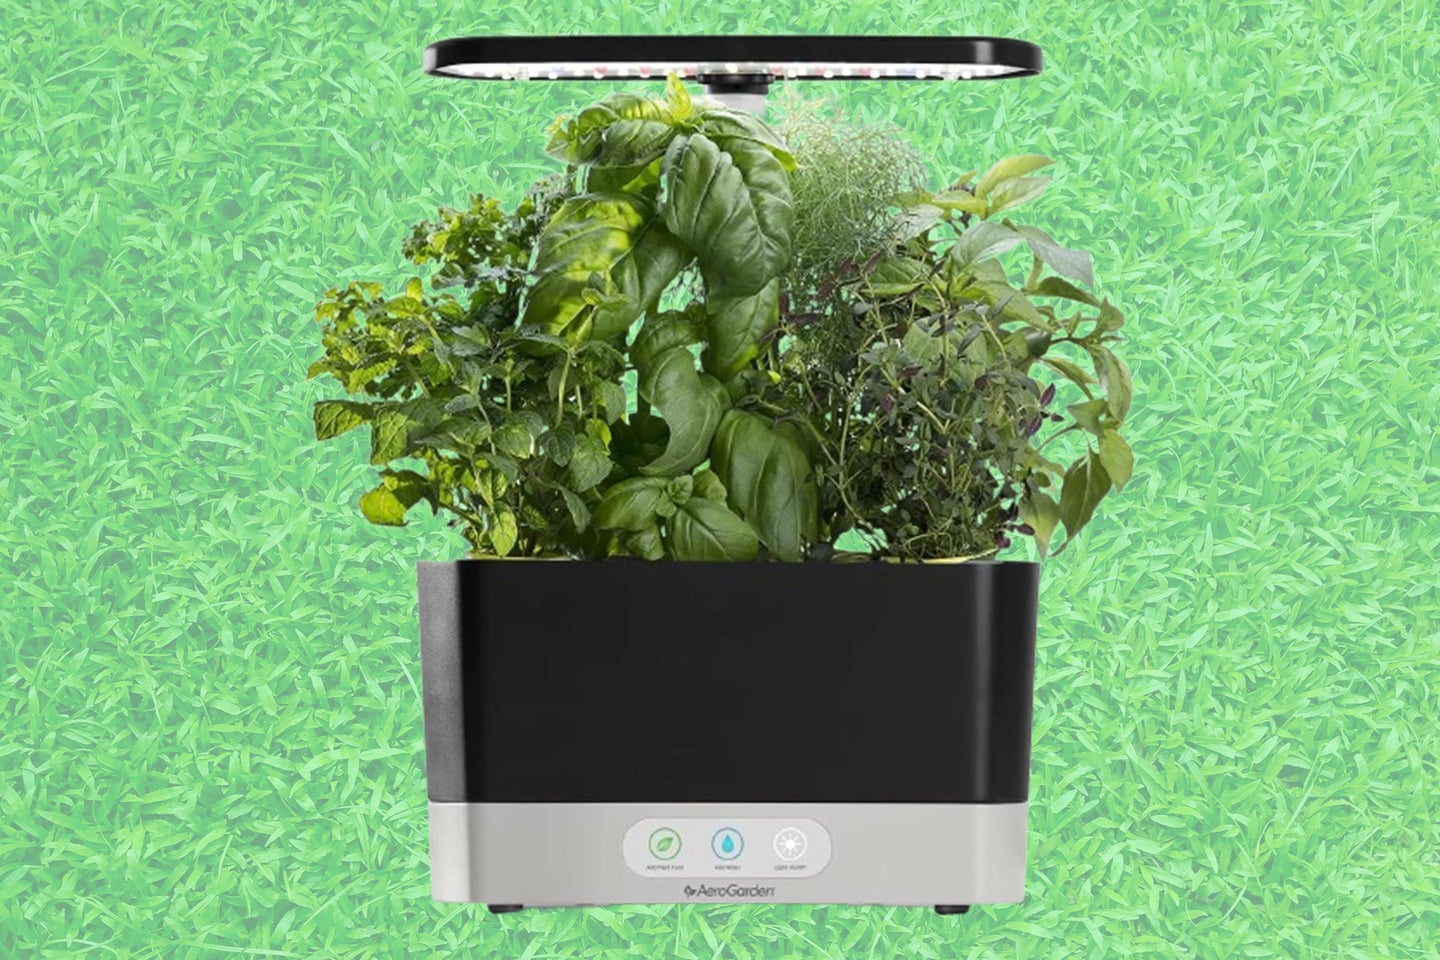 An AeroGarden hydorponic garden system on a bright green background with a sheer overlay of grass.